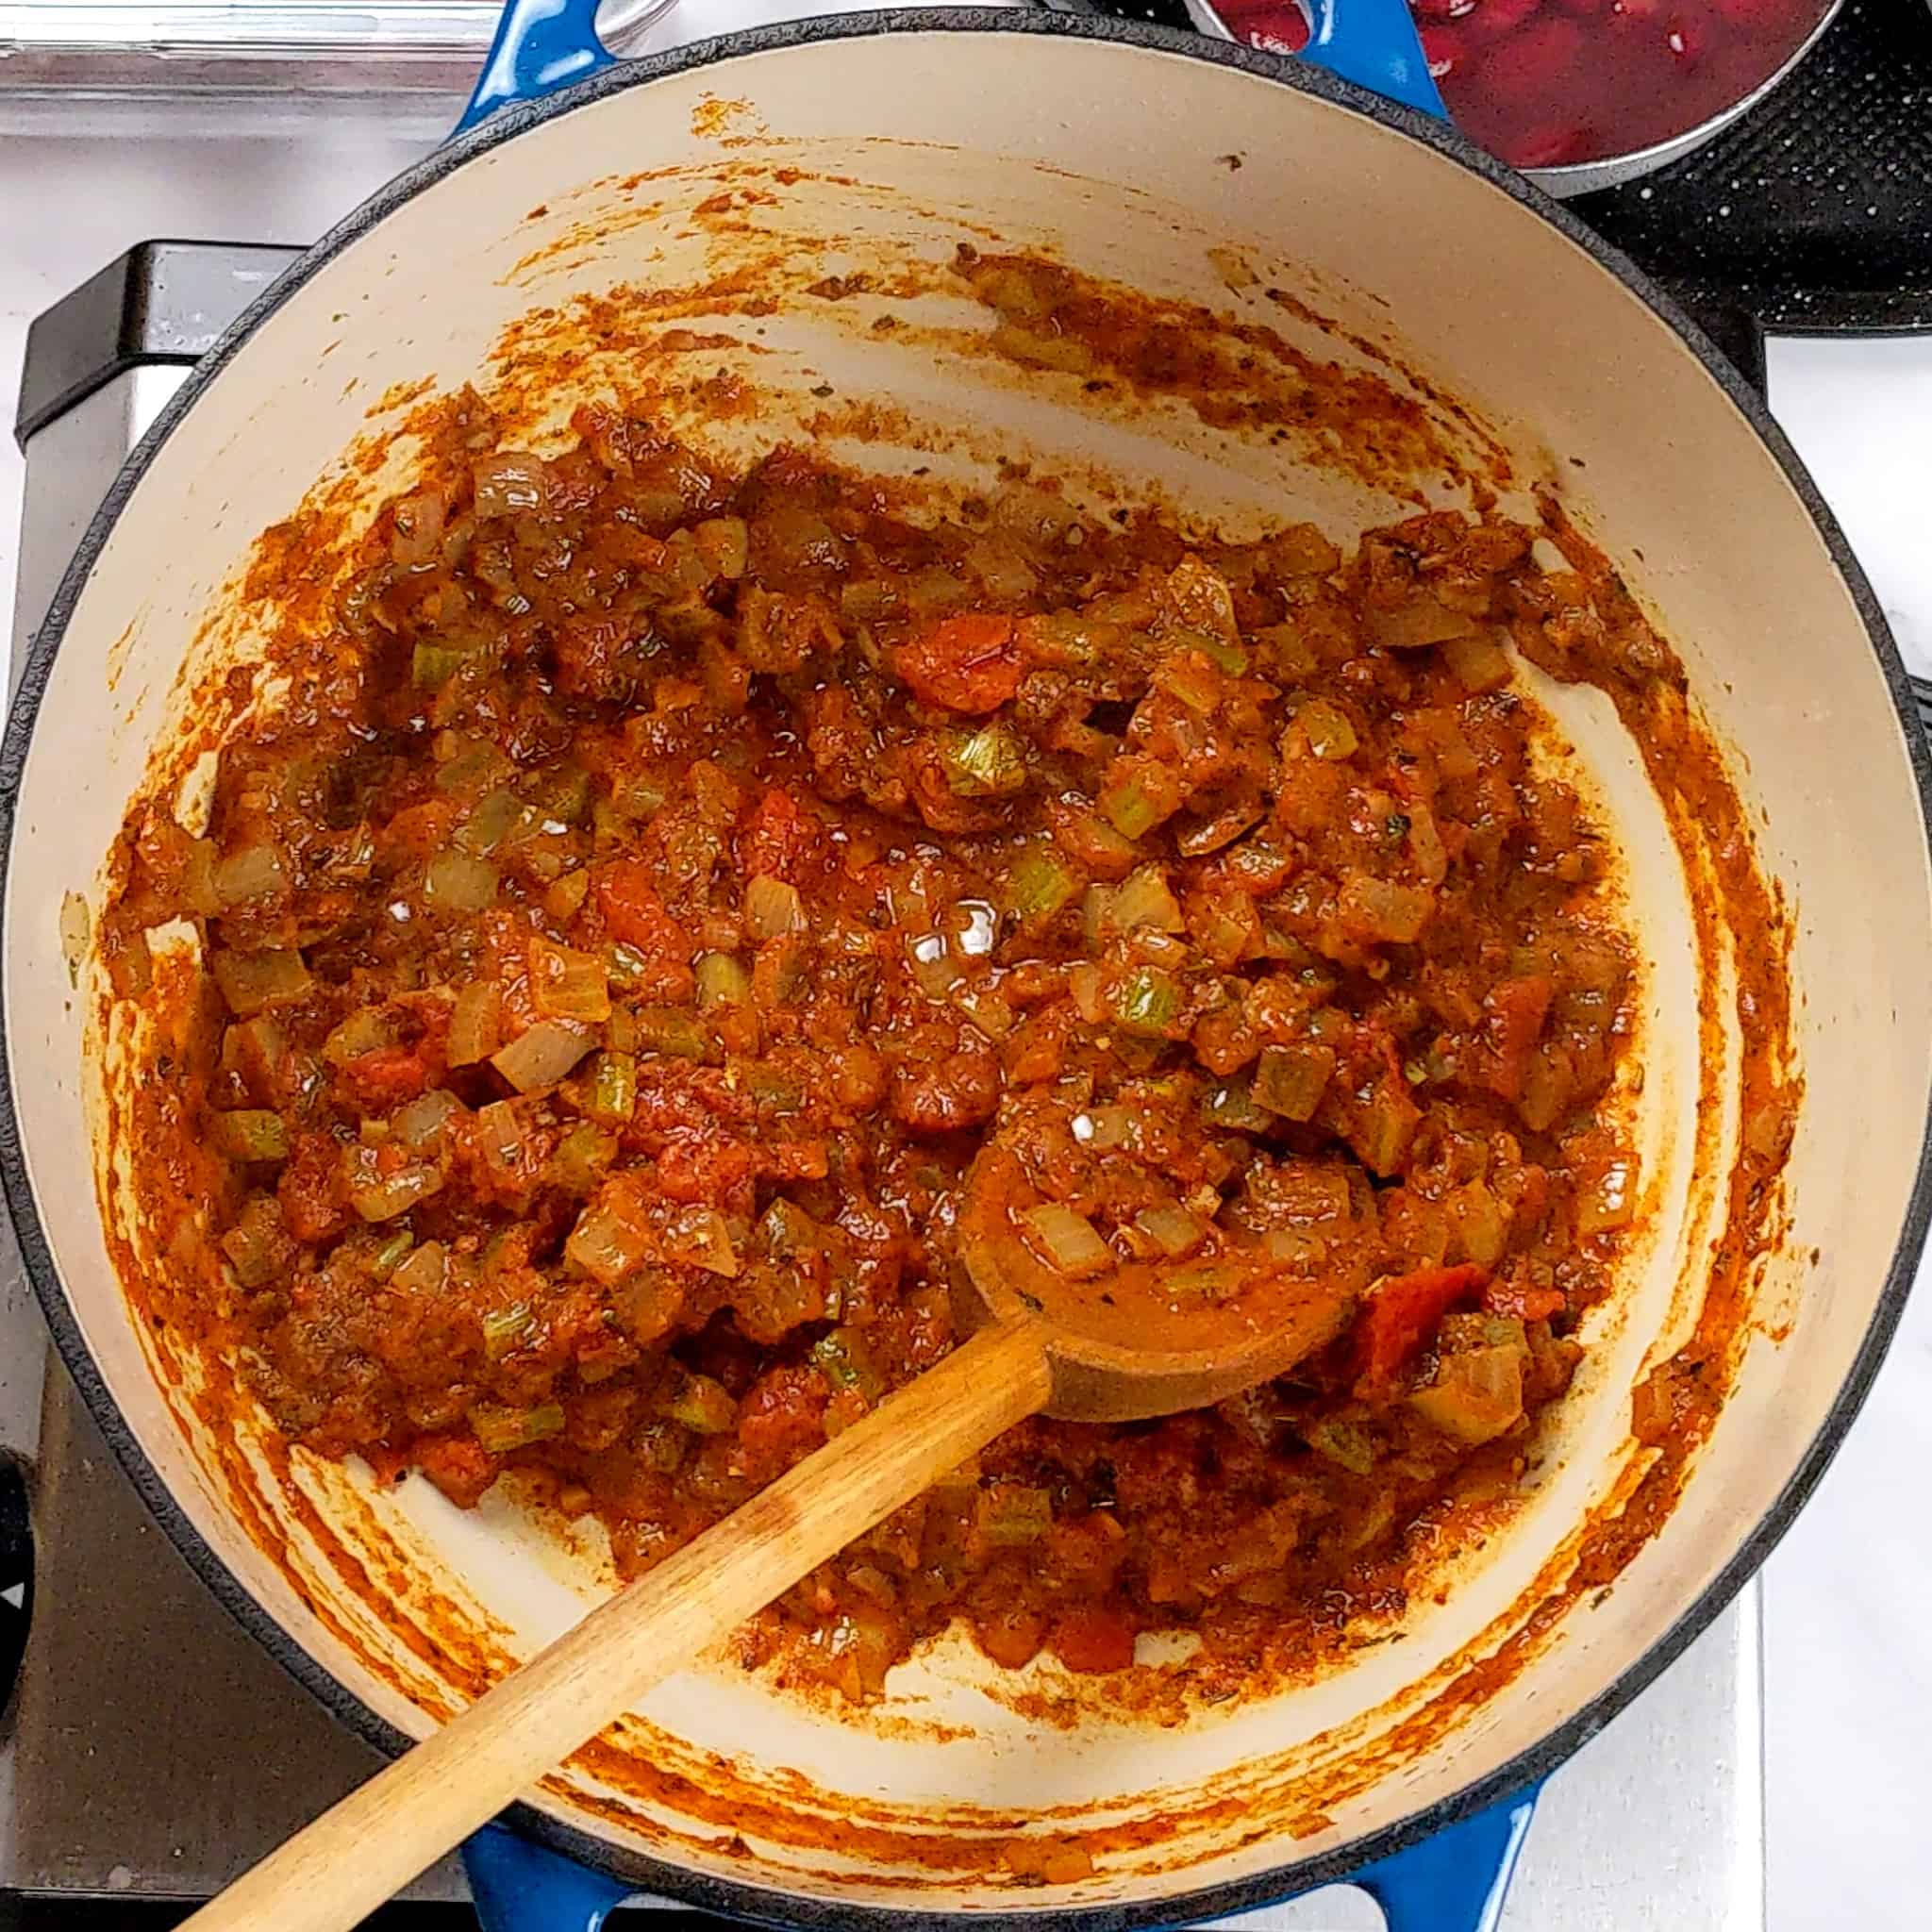 a thick tomato sauce in paste consistency mixed with the onion, celery mixture being stirred with a wooden spoon that has been cooked down with less liquid